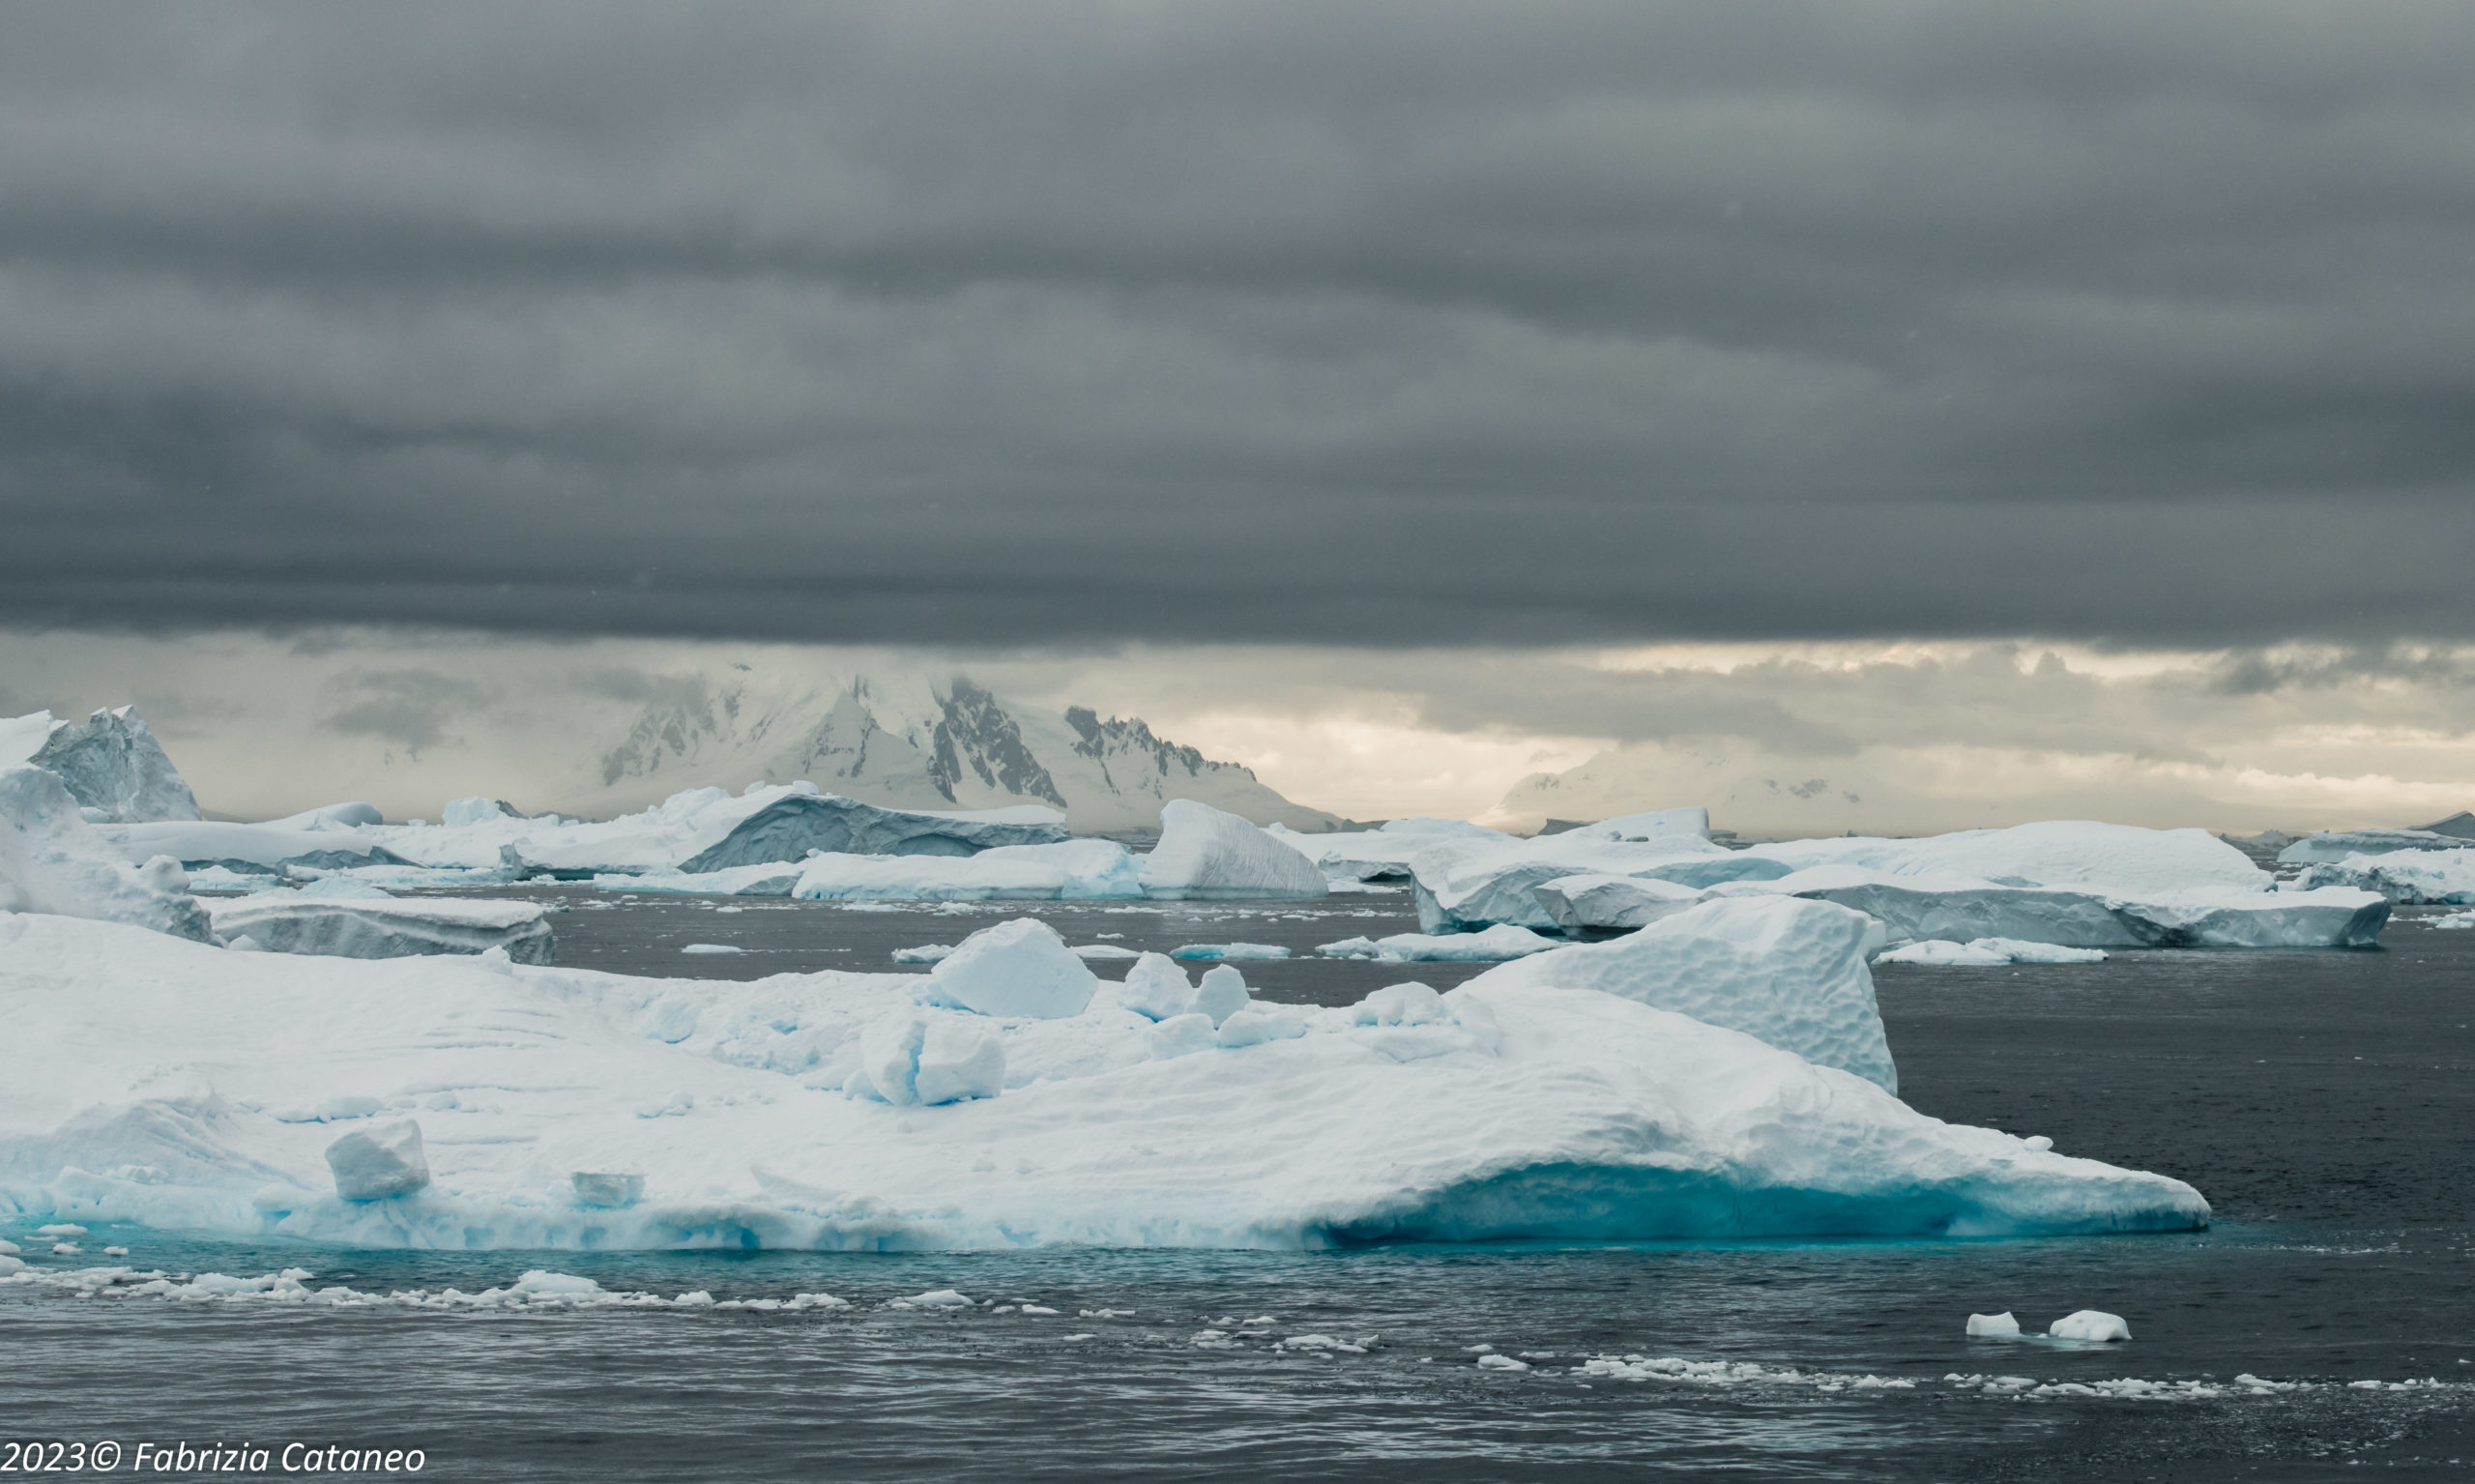 Icebergs seen while approaching Fish Islands, the entrance to Holtedahl Bay, off the west coast of Graham Land, Antarctica. Photo: Fabrizia Cataneo